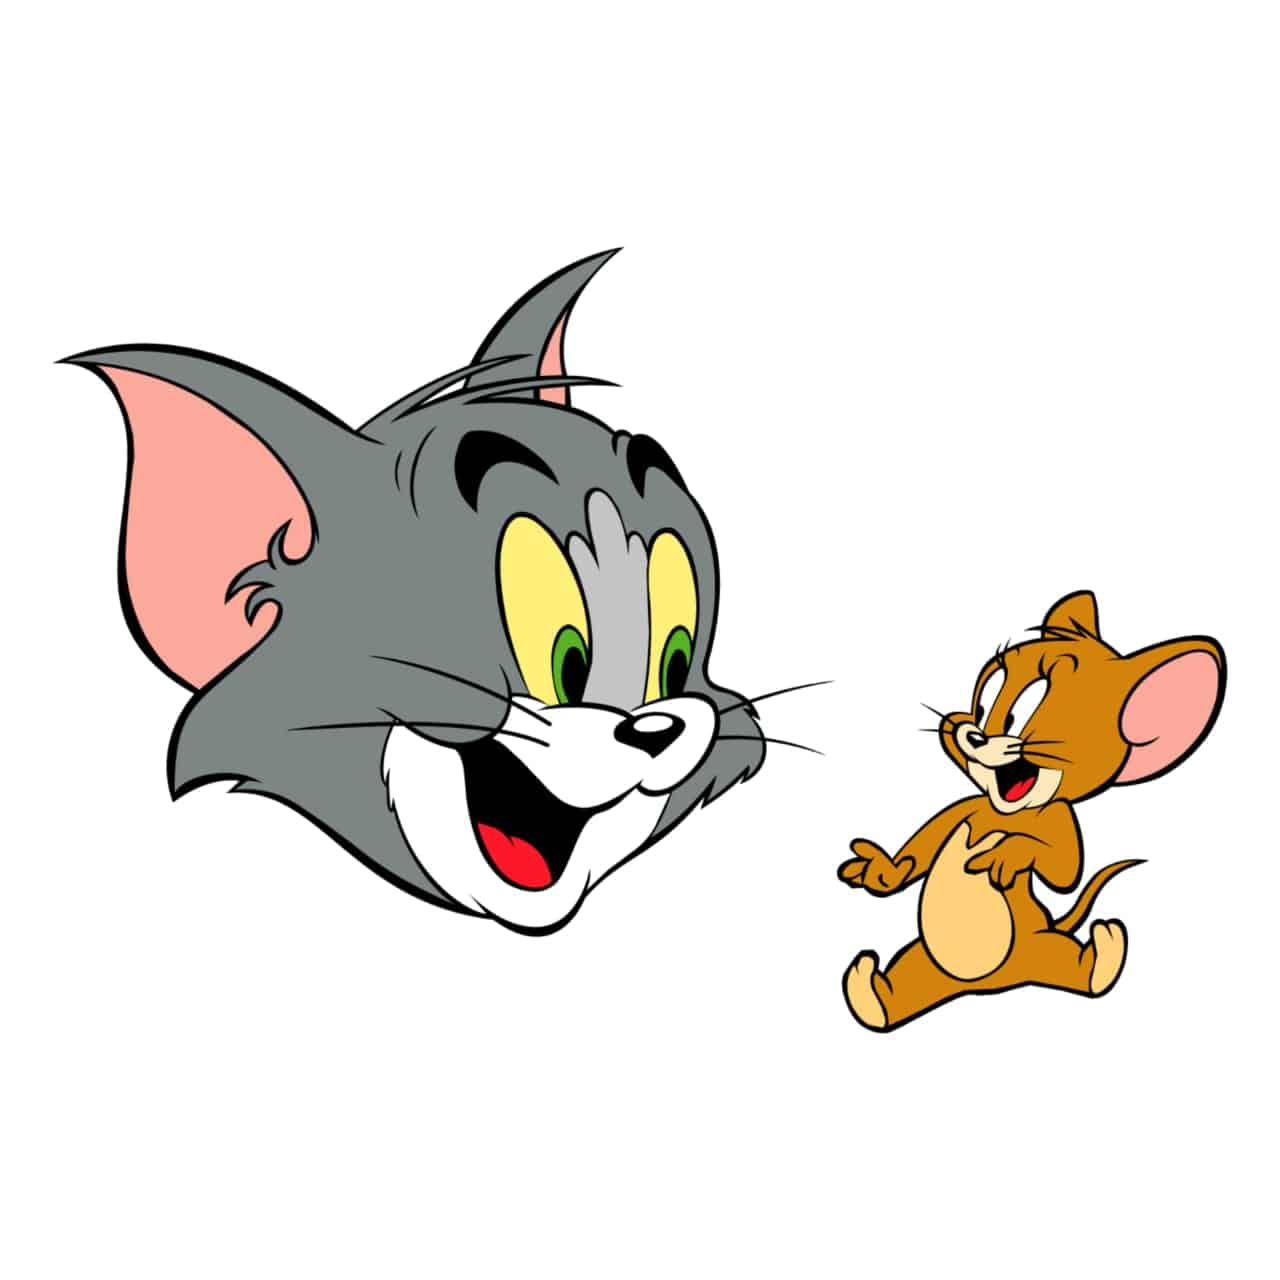 Tom and Jerry DP for Whatsapp